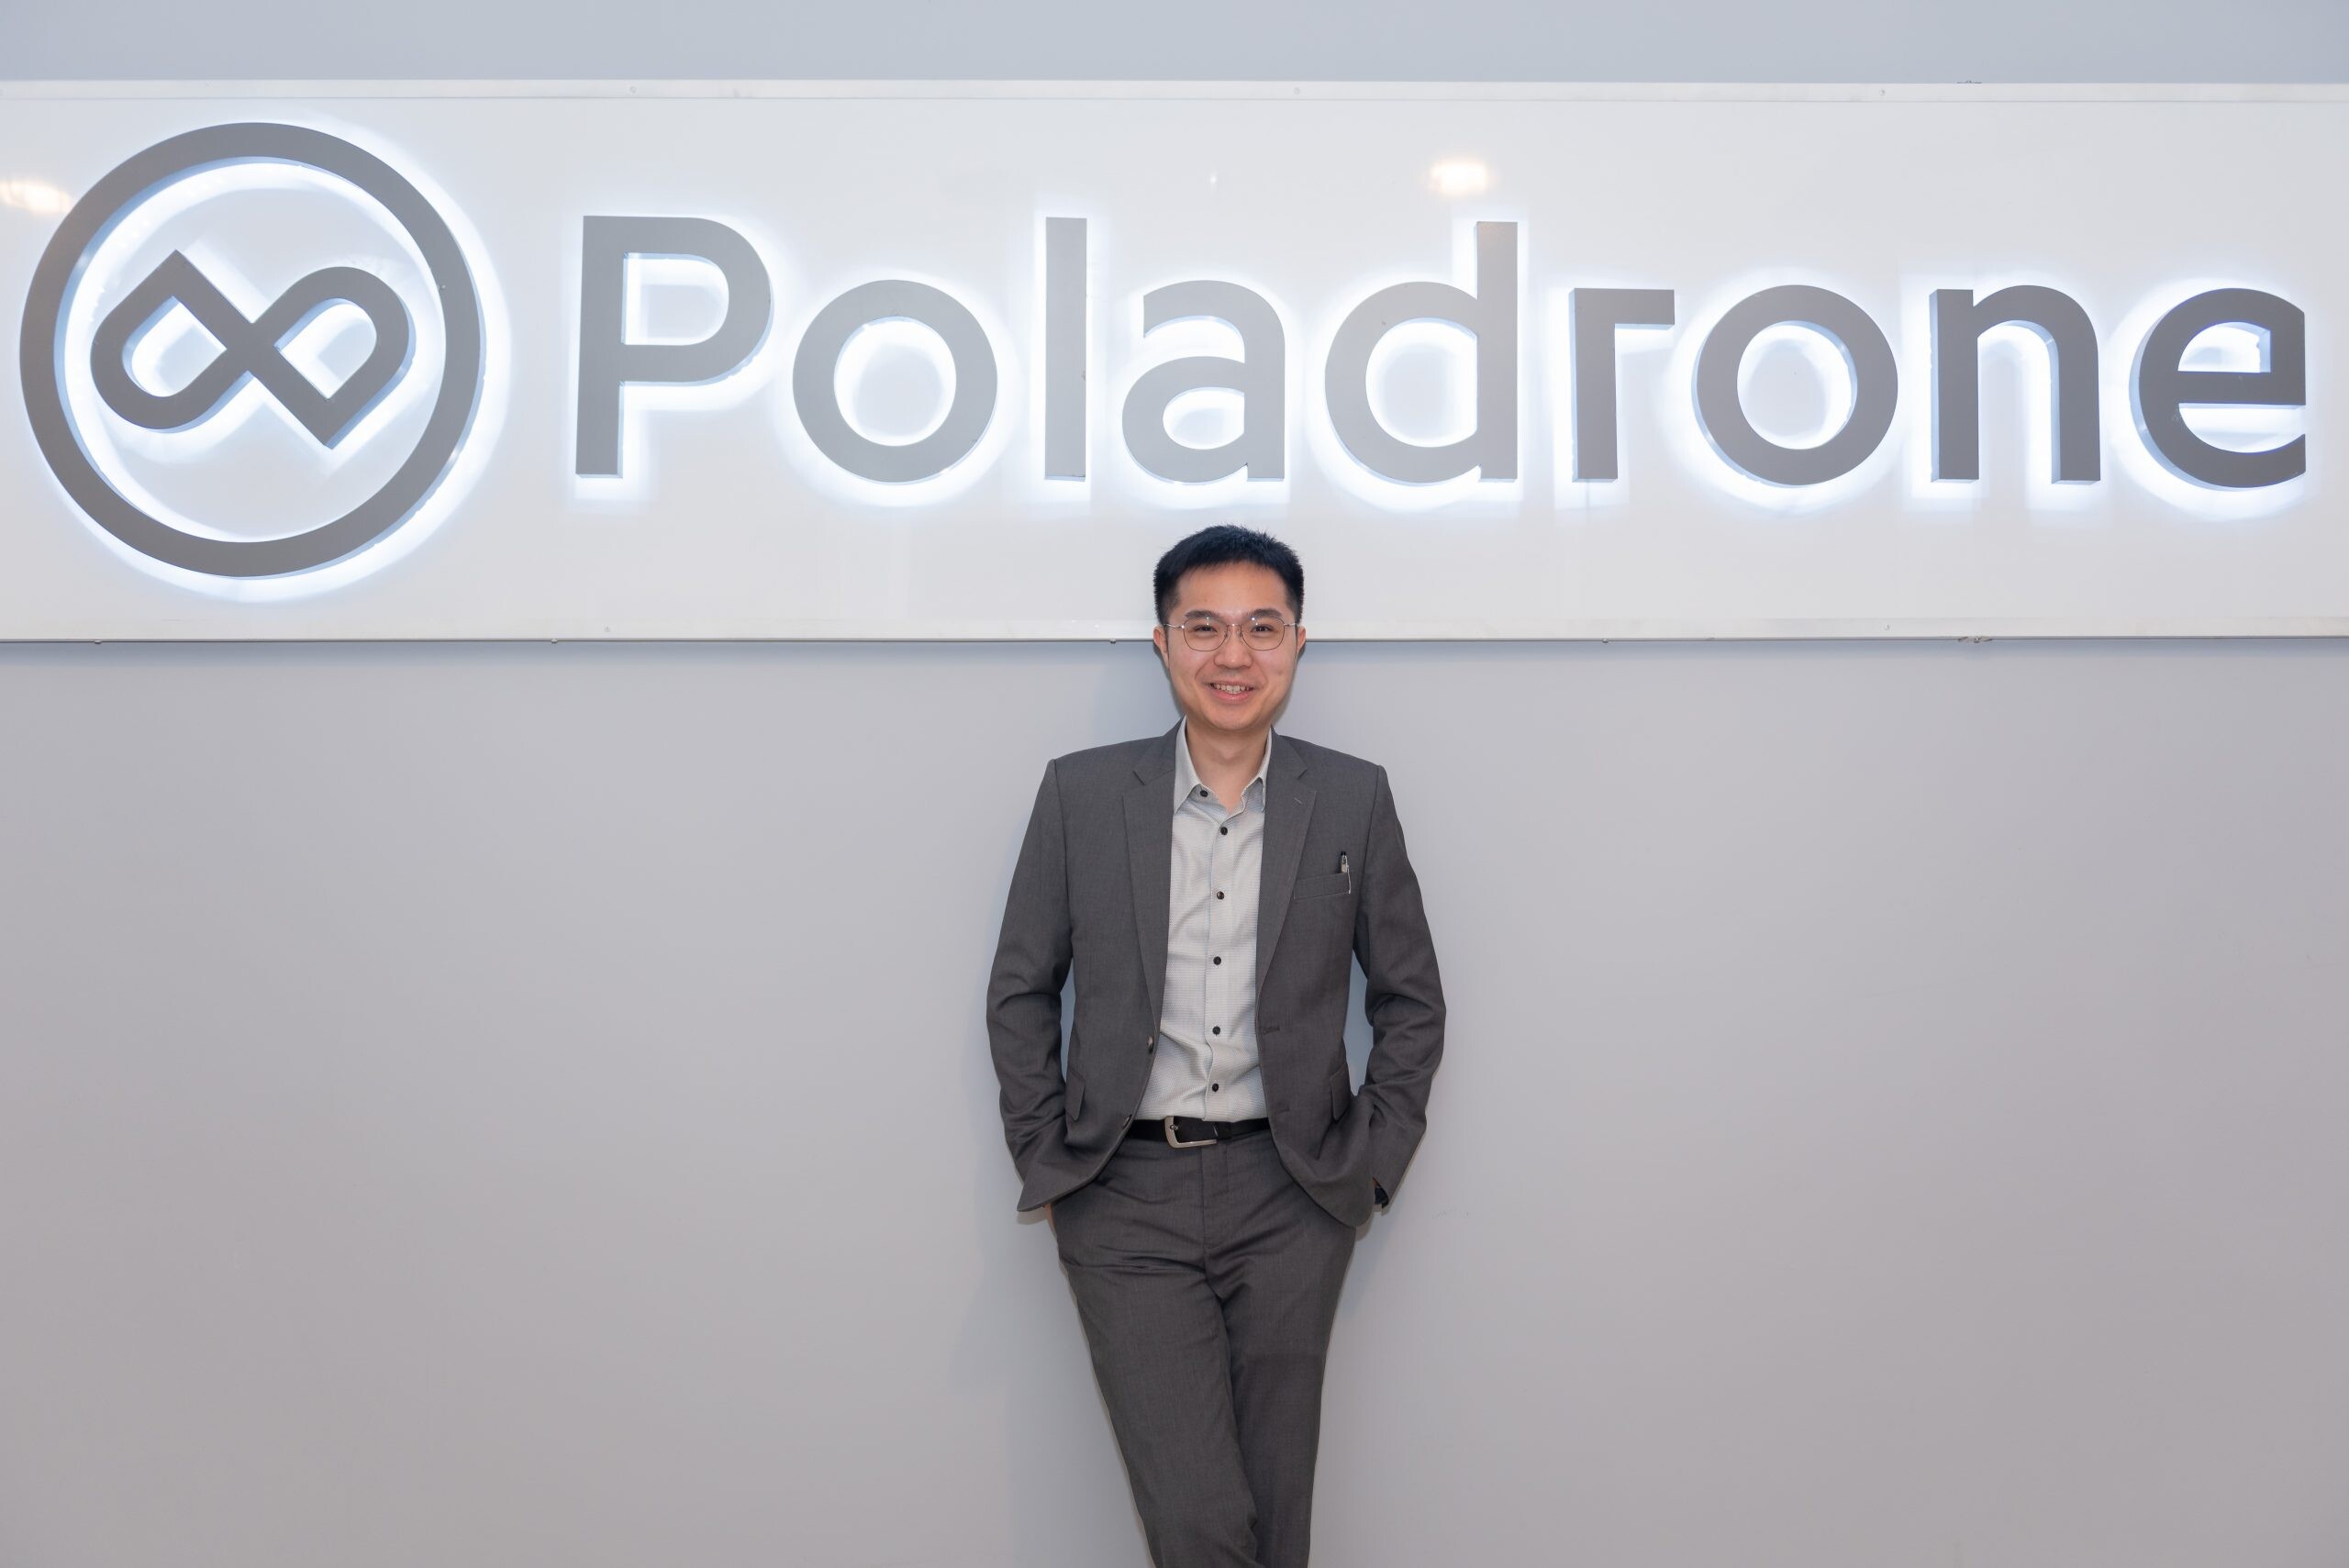 DroneTech Startup Poladrone Raises US$4.29 million in seed round to accelerate drone revolution in Southeast Asia